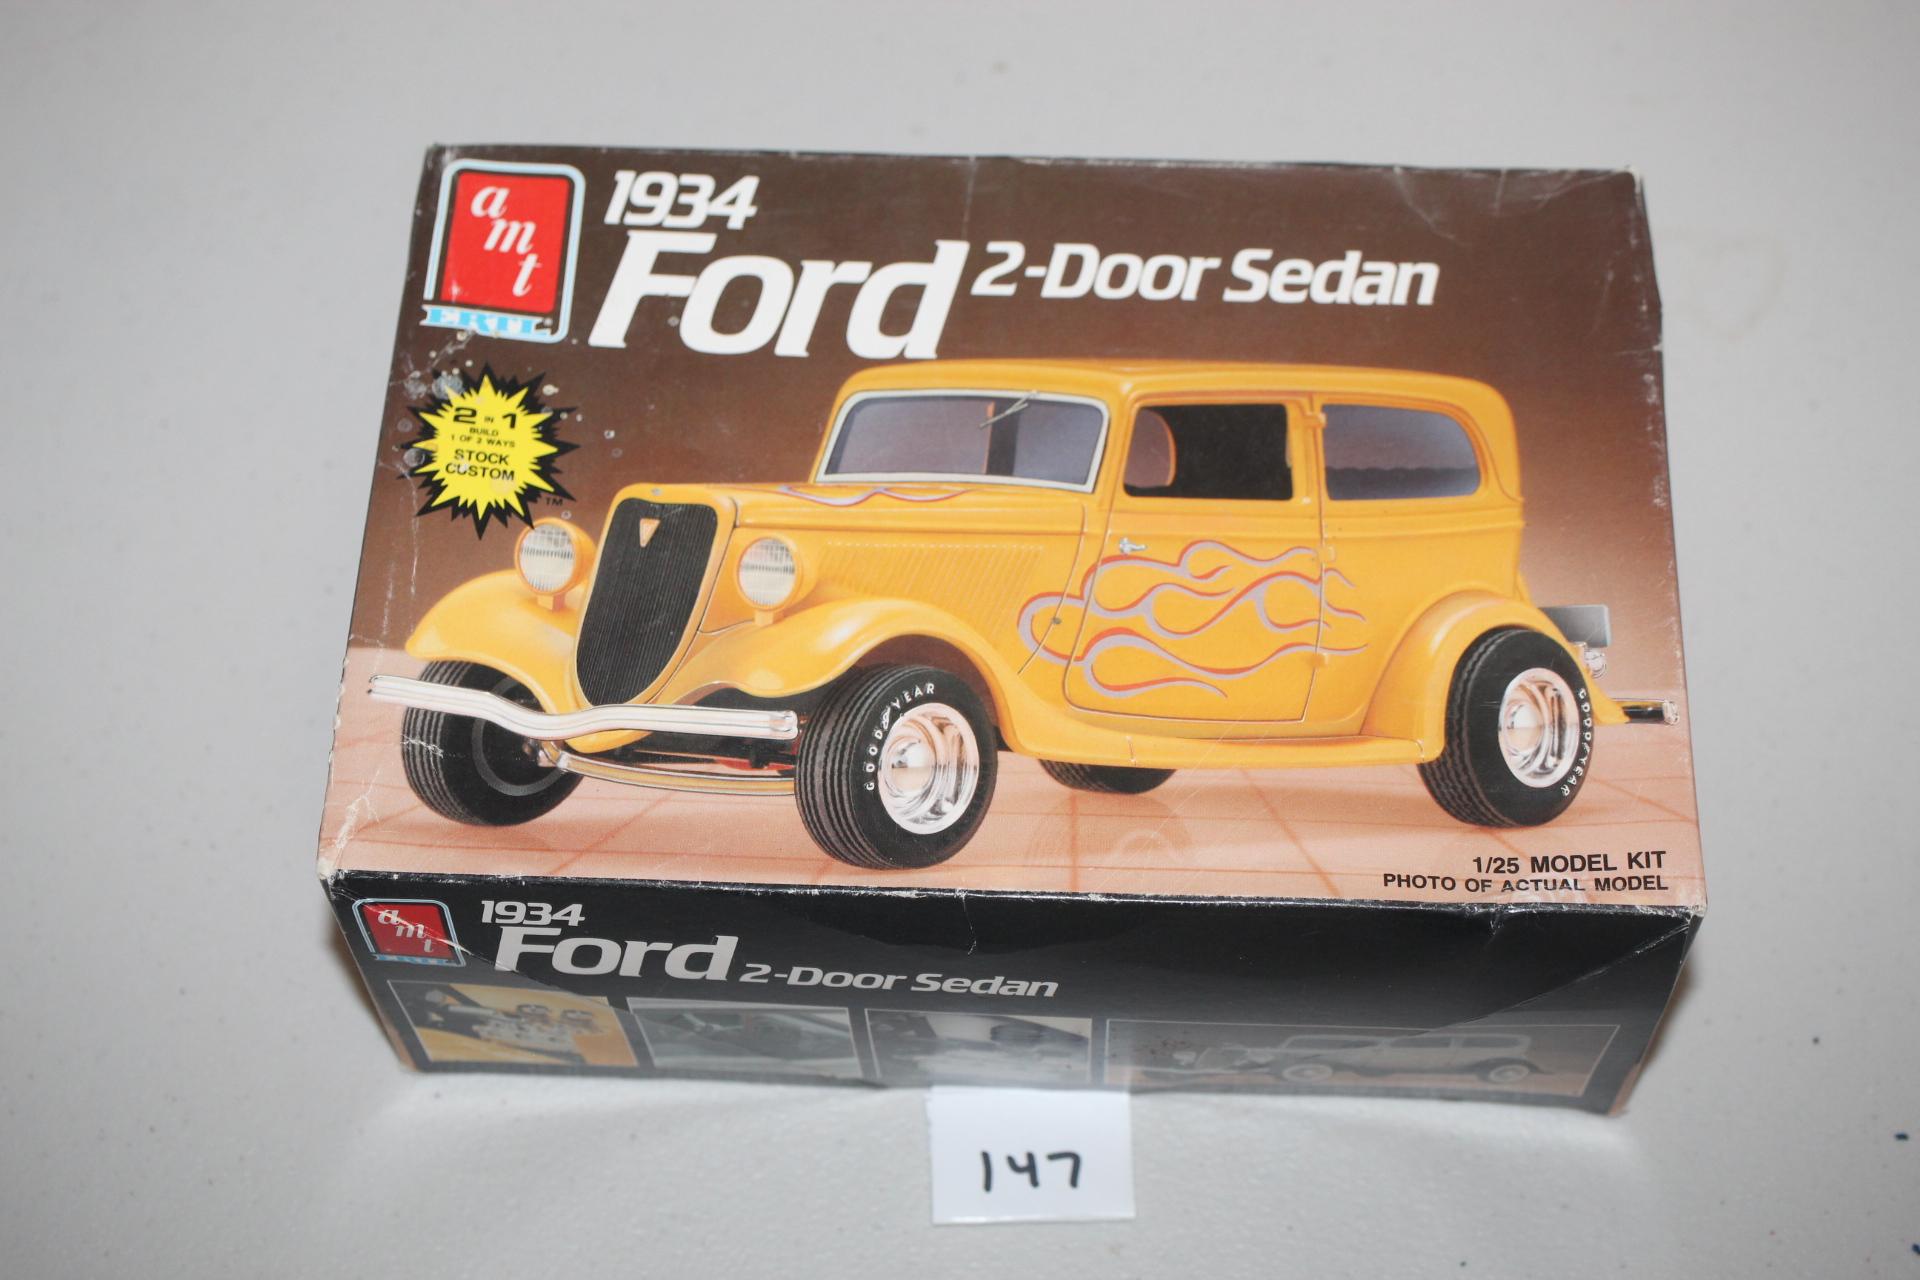 1934 Ford 2-Door Sedan 1/25 Model Kit, AMT Ertl, #6510, Assembly Started, Pieces Not Verified